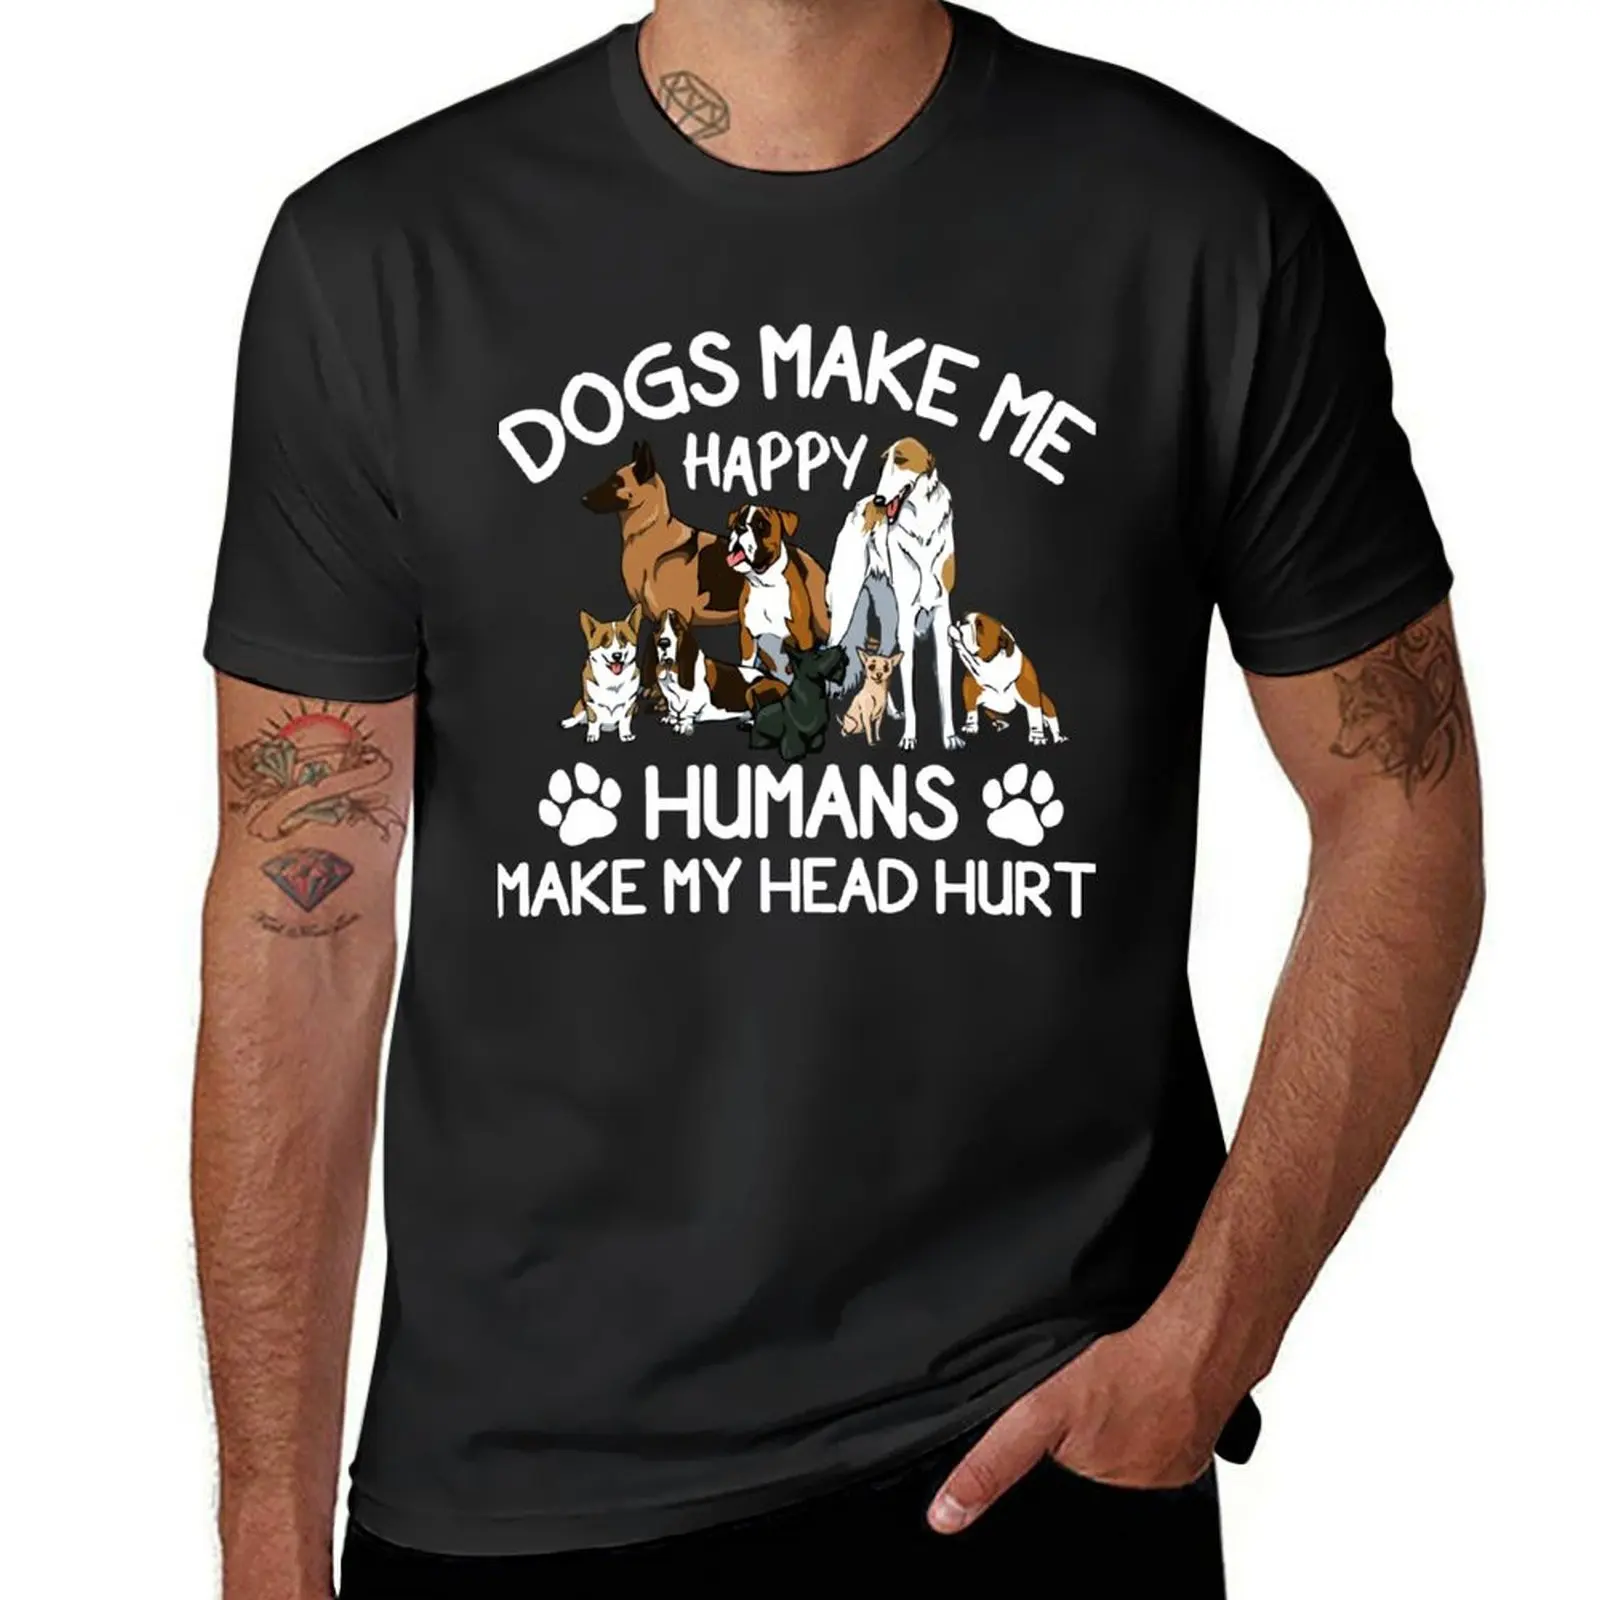 

Dogs Make Me Happy Humans Make My Head Hurt T-Shirt funnys customs quick drying boys whites mens graphic t-shirts big and tall